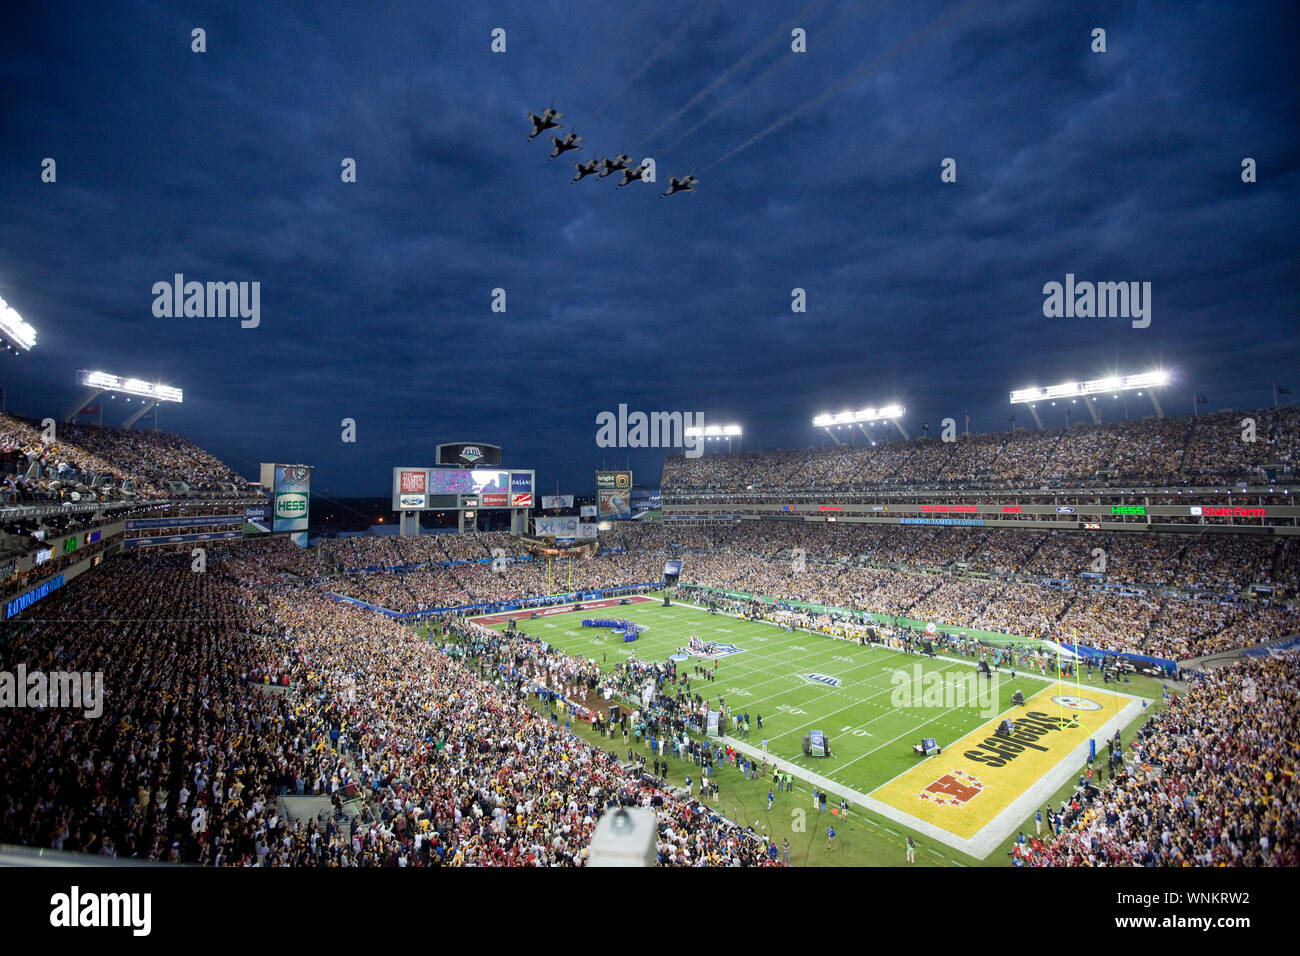 The United States Air Force Thunderbirds perform a flyover during the national anthem before the Super Bowl XLIII in Tampa, Florida. Stock Photo